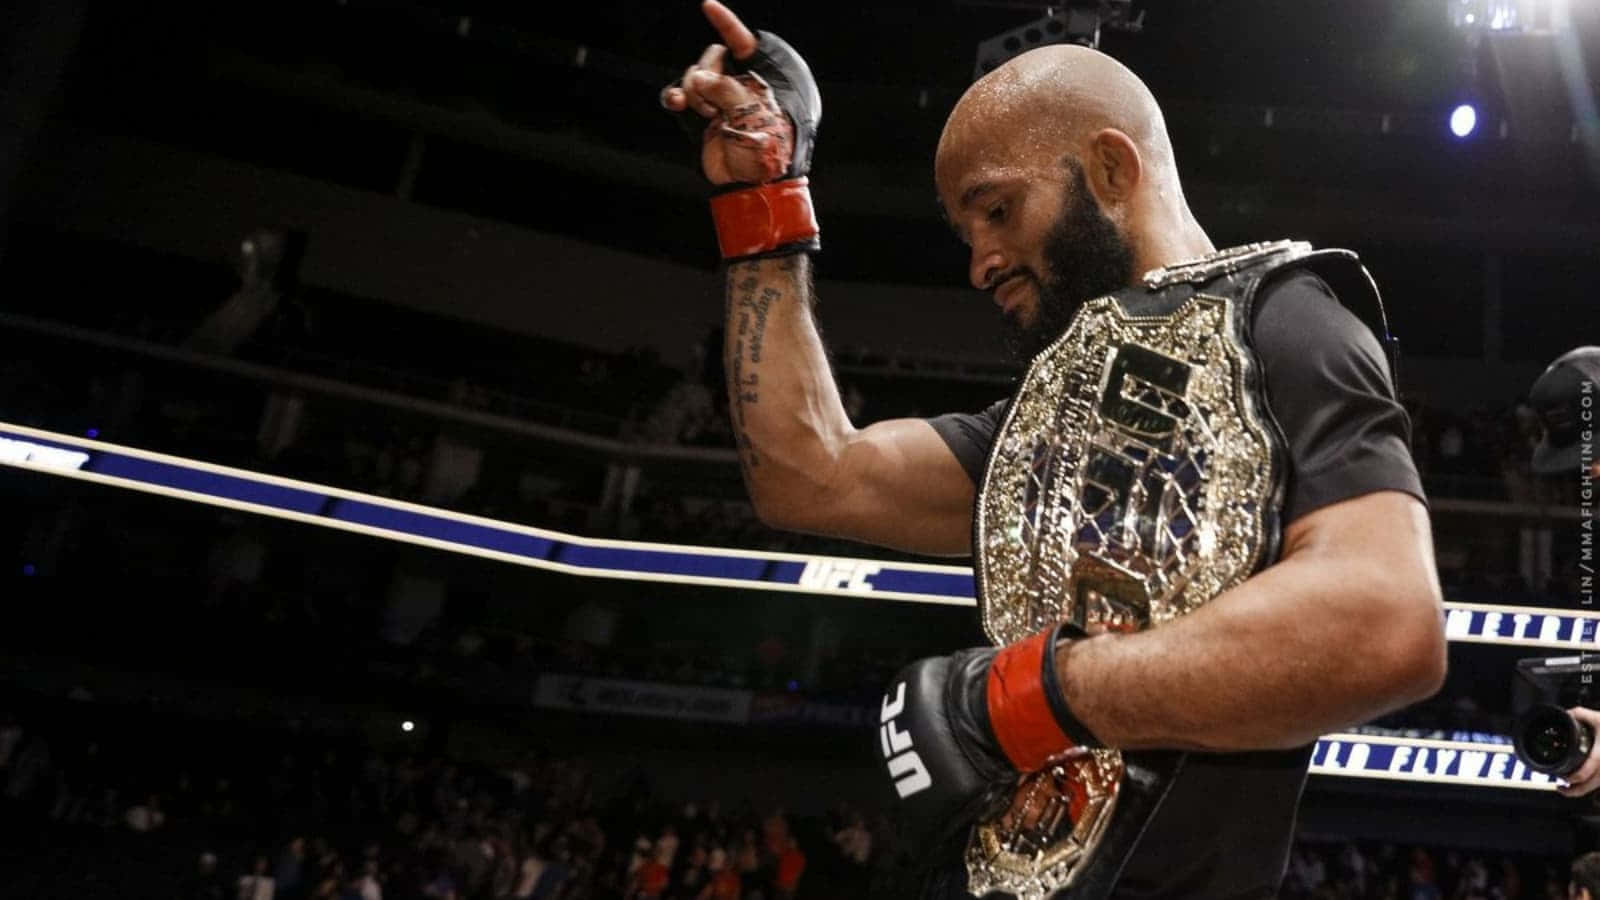 Mma Champion Demetrious Johnson As Mighty Mouse Background